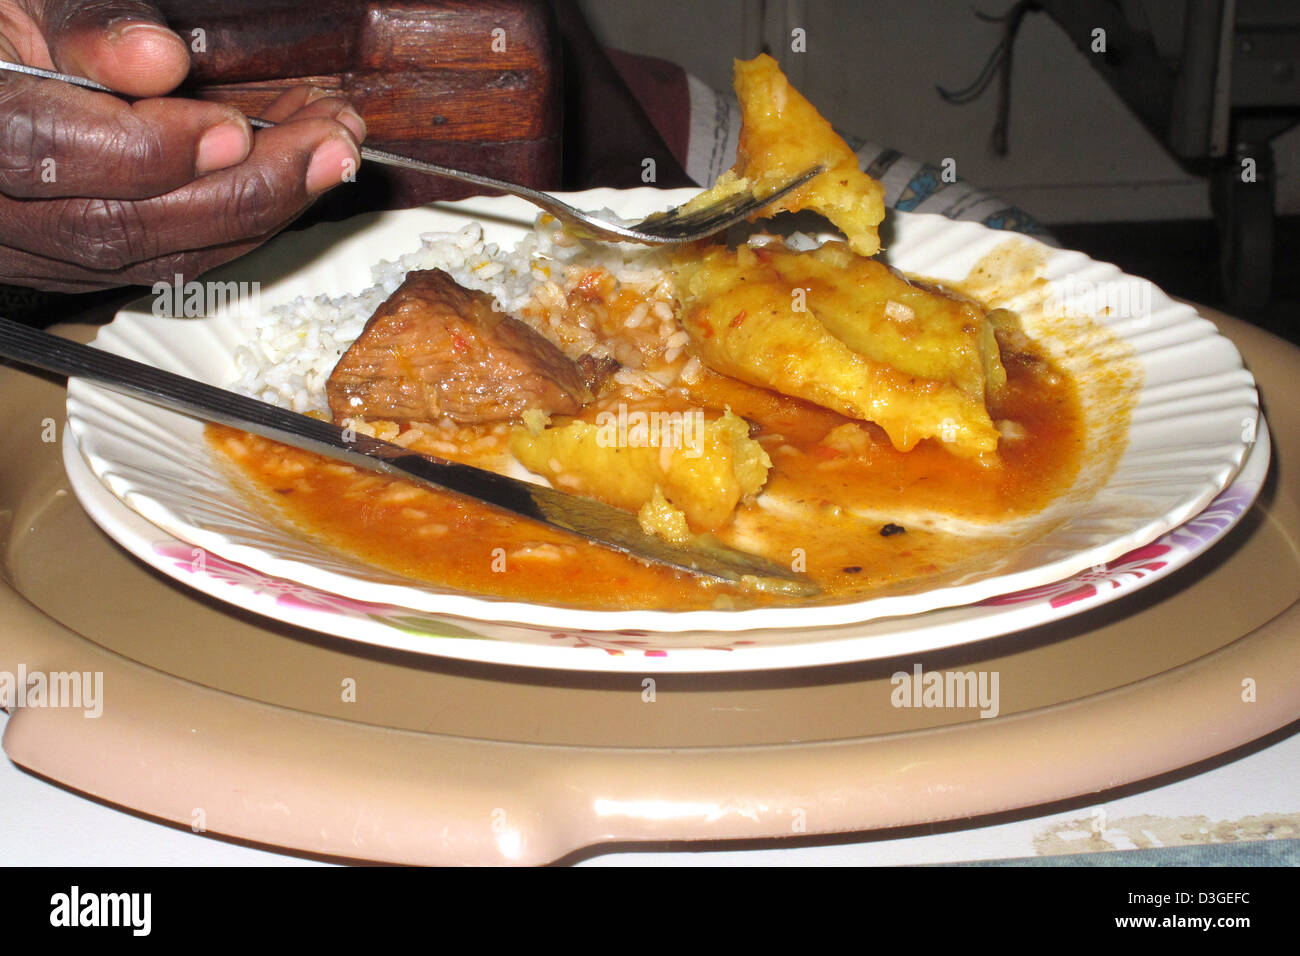 Eating a hospital meal consisting of beef, rice and matooke (plantain) in Mulago Hospital, Kampala Stock Photo